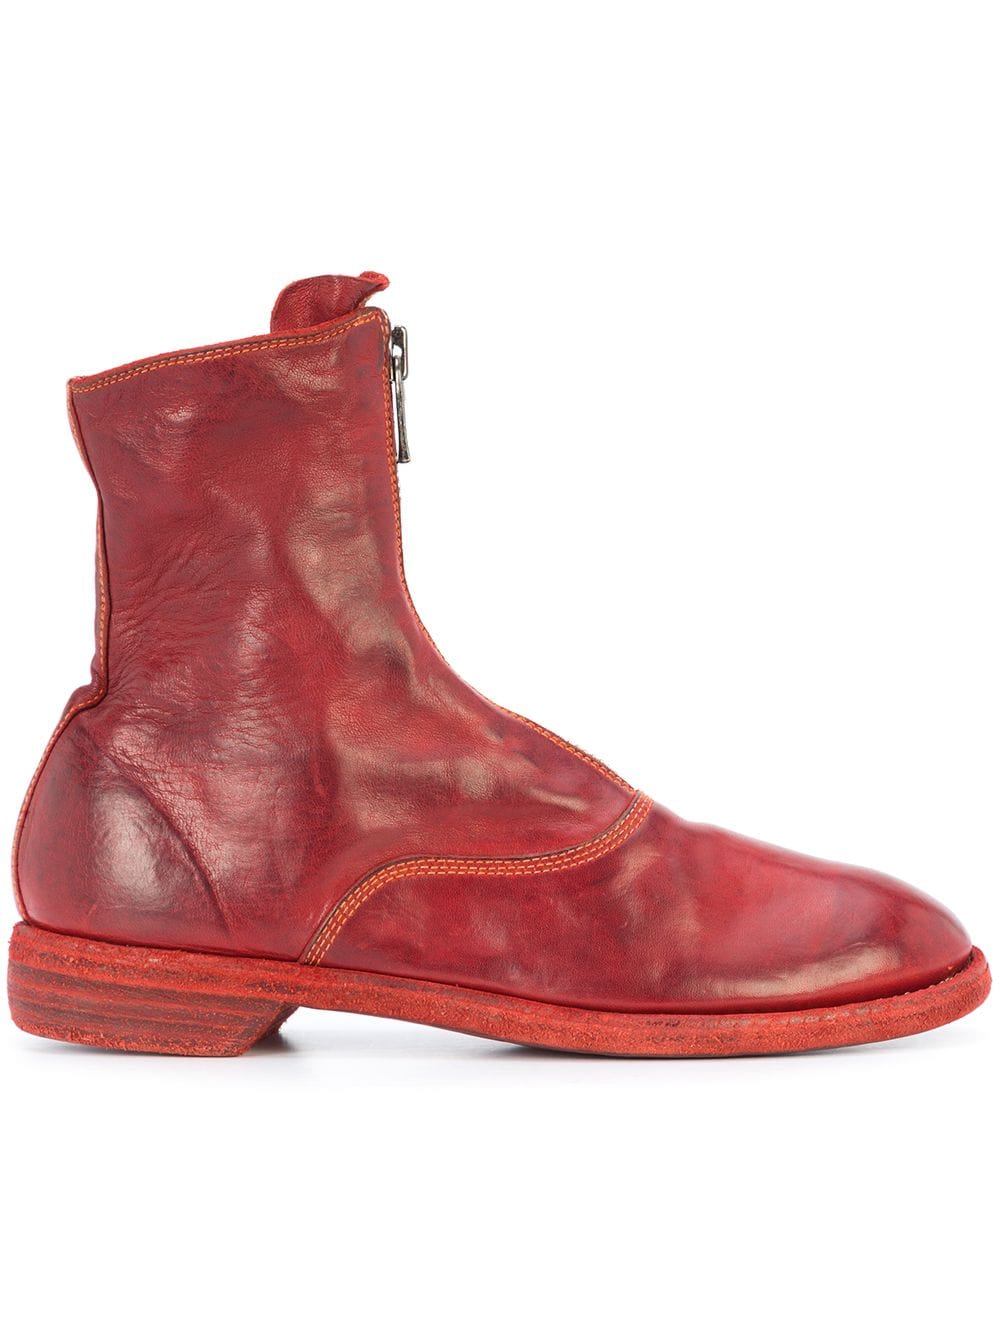 Guidi - zip detail boots - women - Horse Leather/LeatherLeather - 36 - Red